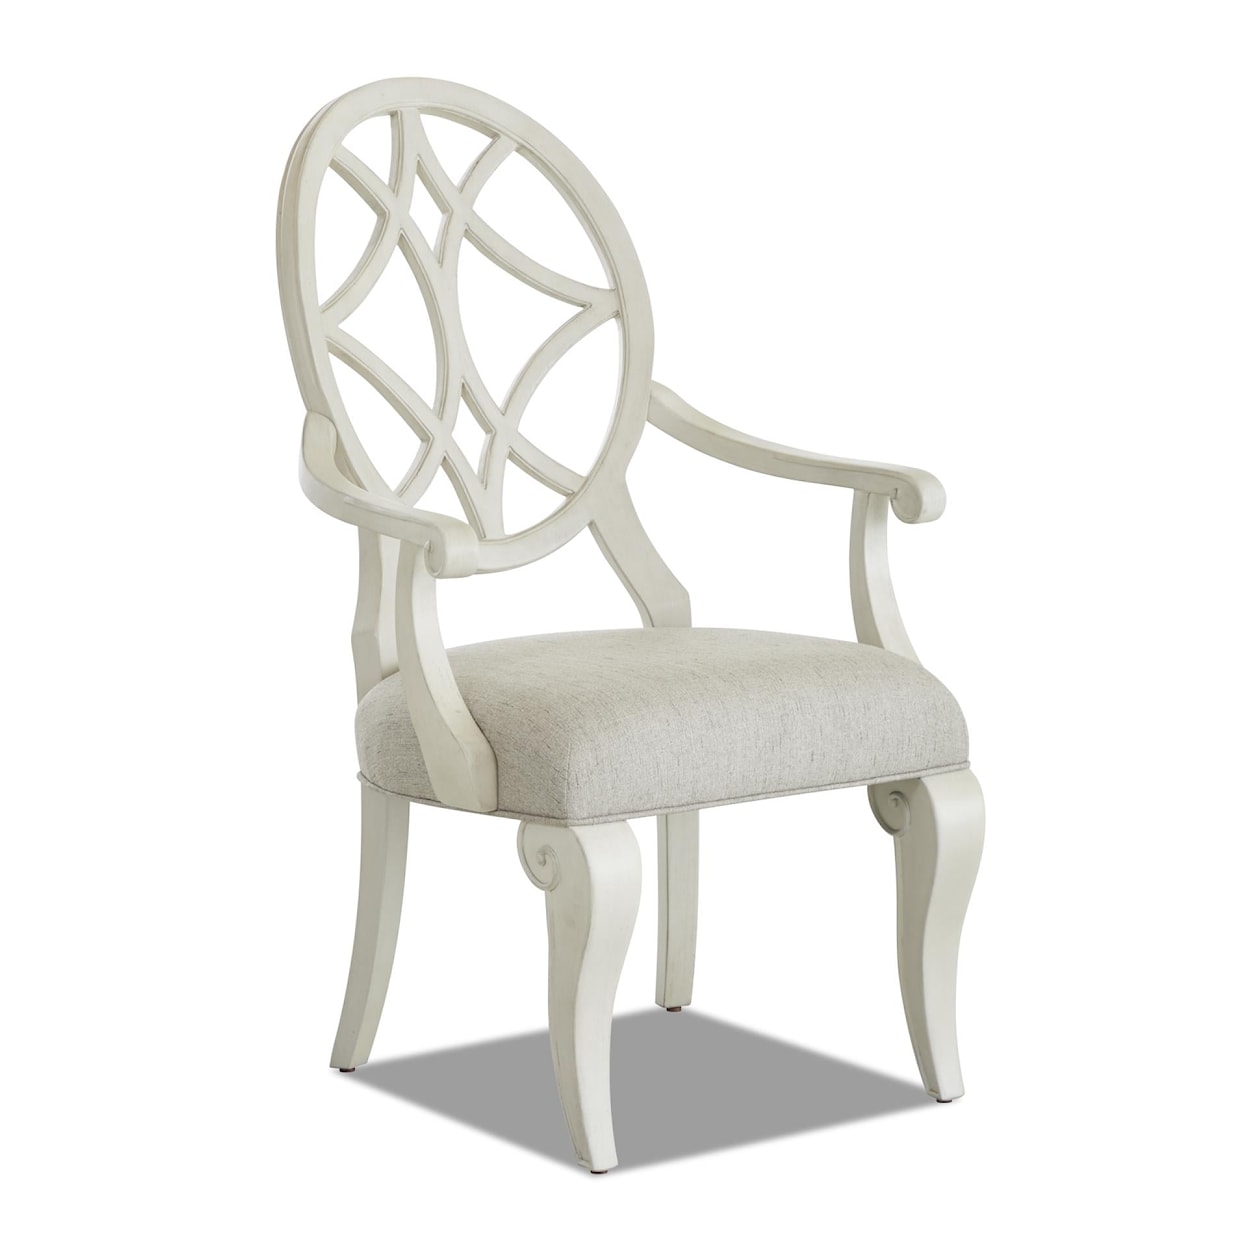 Trisha Yearwood Home Collection by Legacy Classic Jasper County Arm Chair